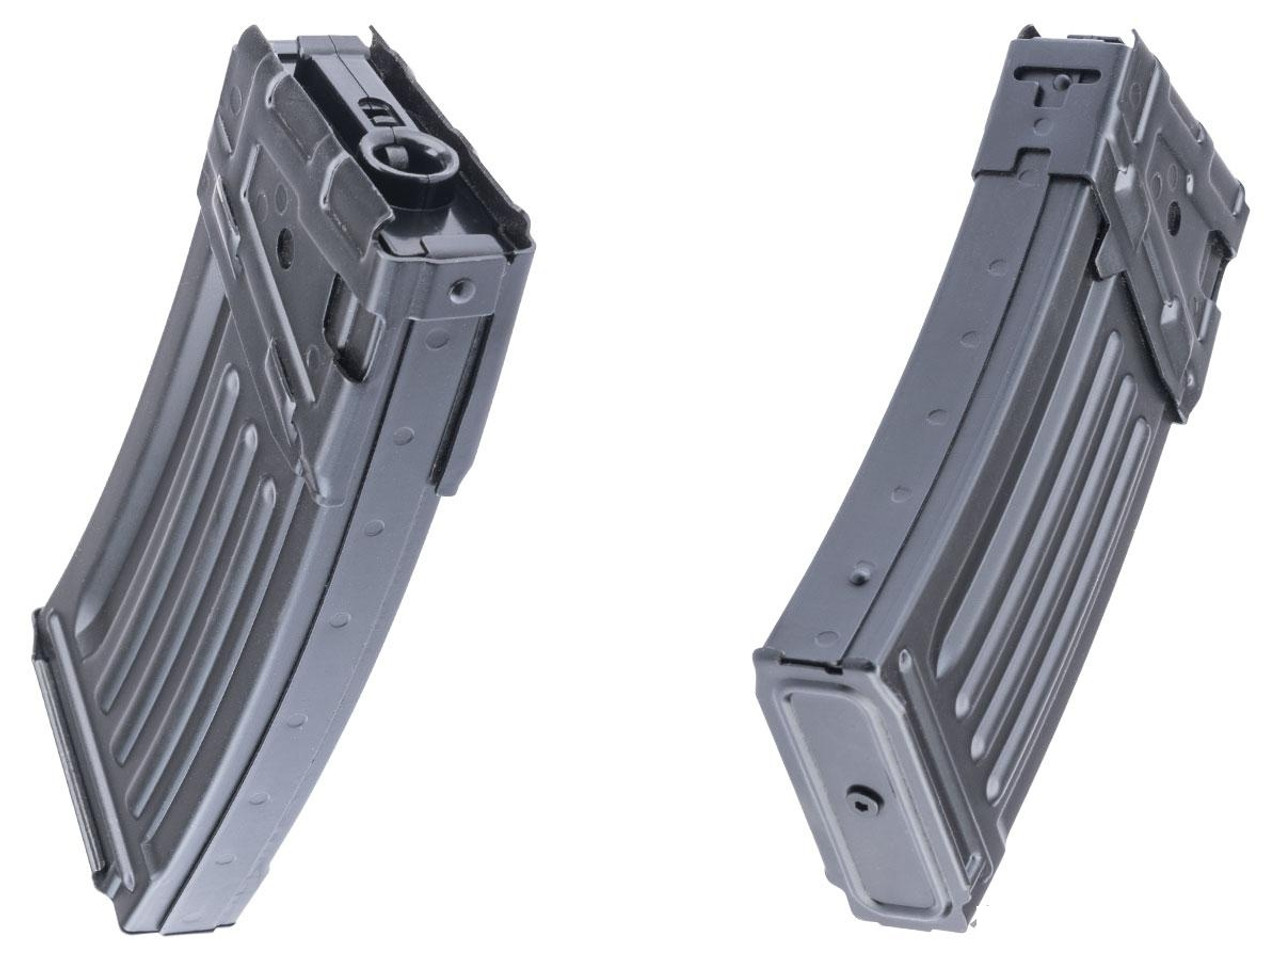 LCT Metal 100rd Mid-Cap Magazine for LK-33 Series AEGs